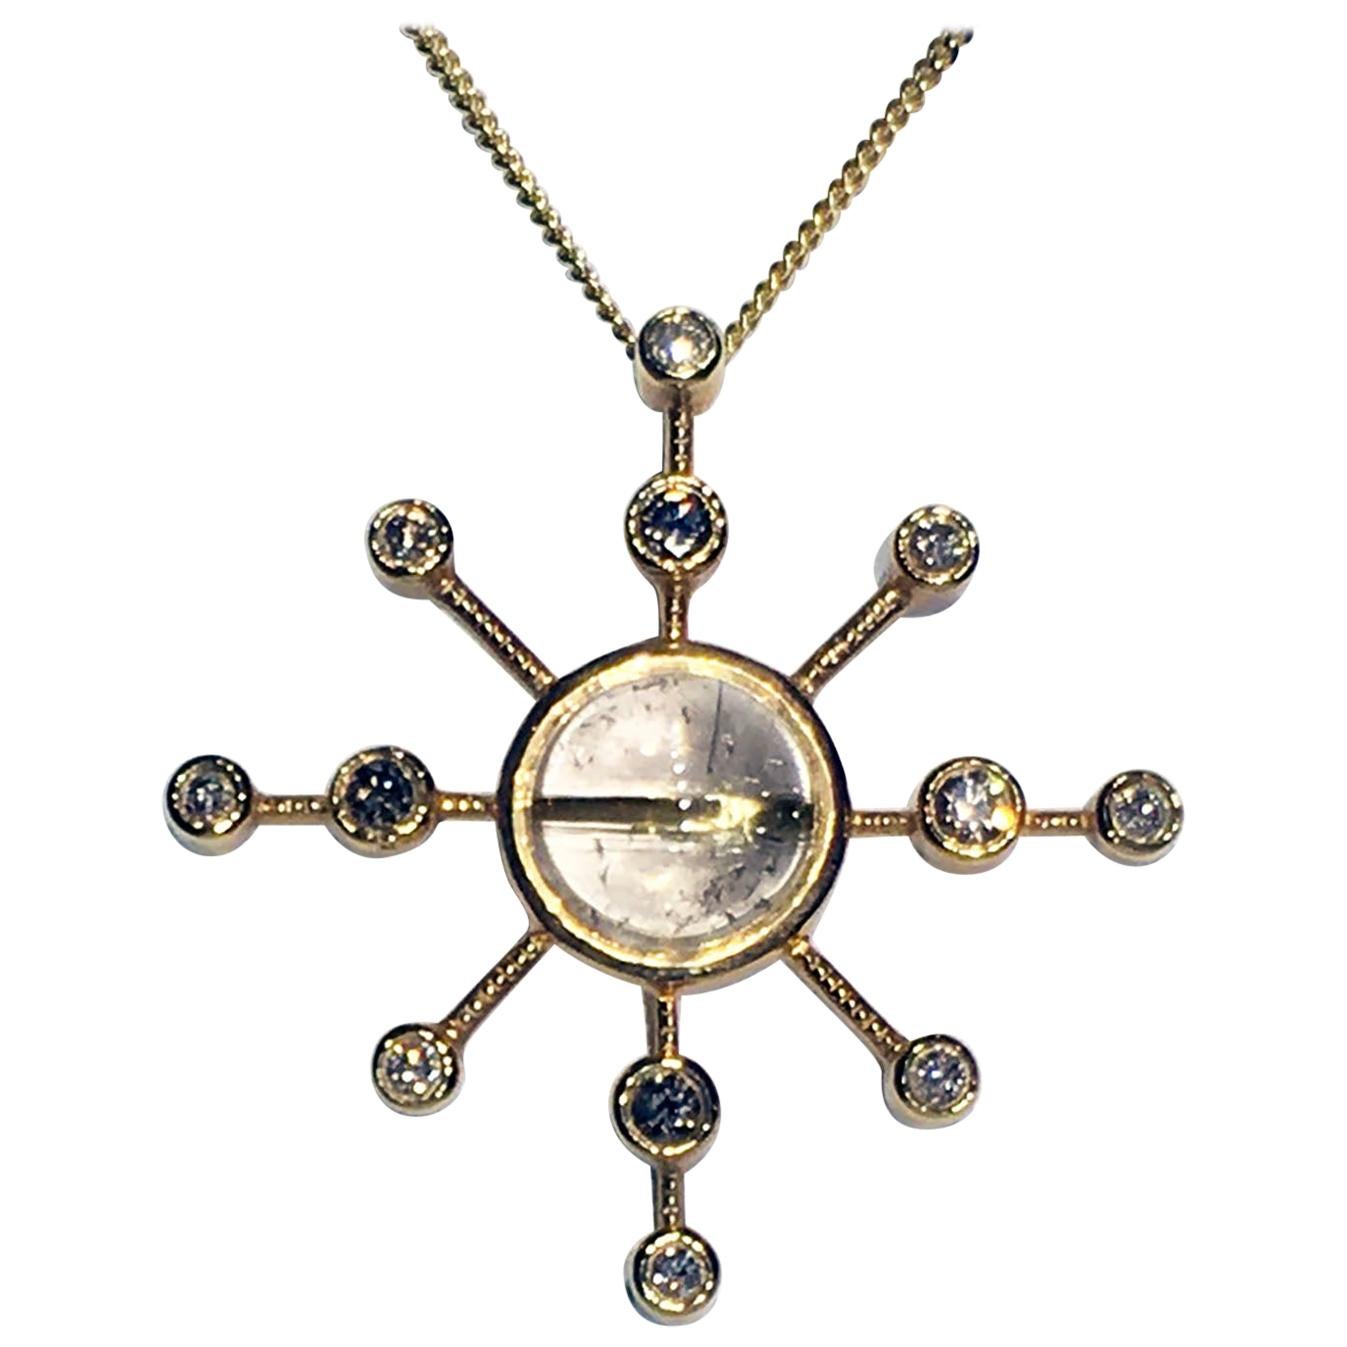 An 18k Yellow Gold Diamond Starburst Pendant set with Rutillated Quartz. This 18kt Gold Starburst Pendant features a central Rutile Quartz Cabochon of 5.57 Carats and is surrounded by 12 Champagne Diamonds totaling 0.76 Carats. The Gold weight of